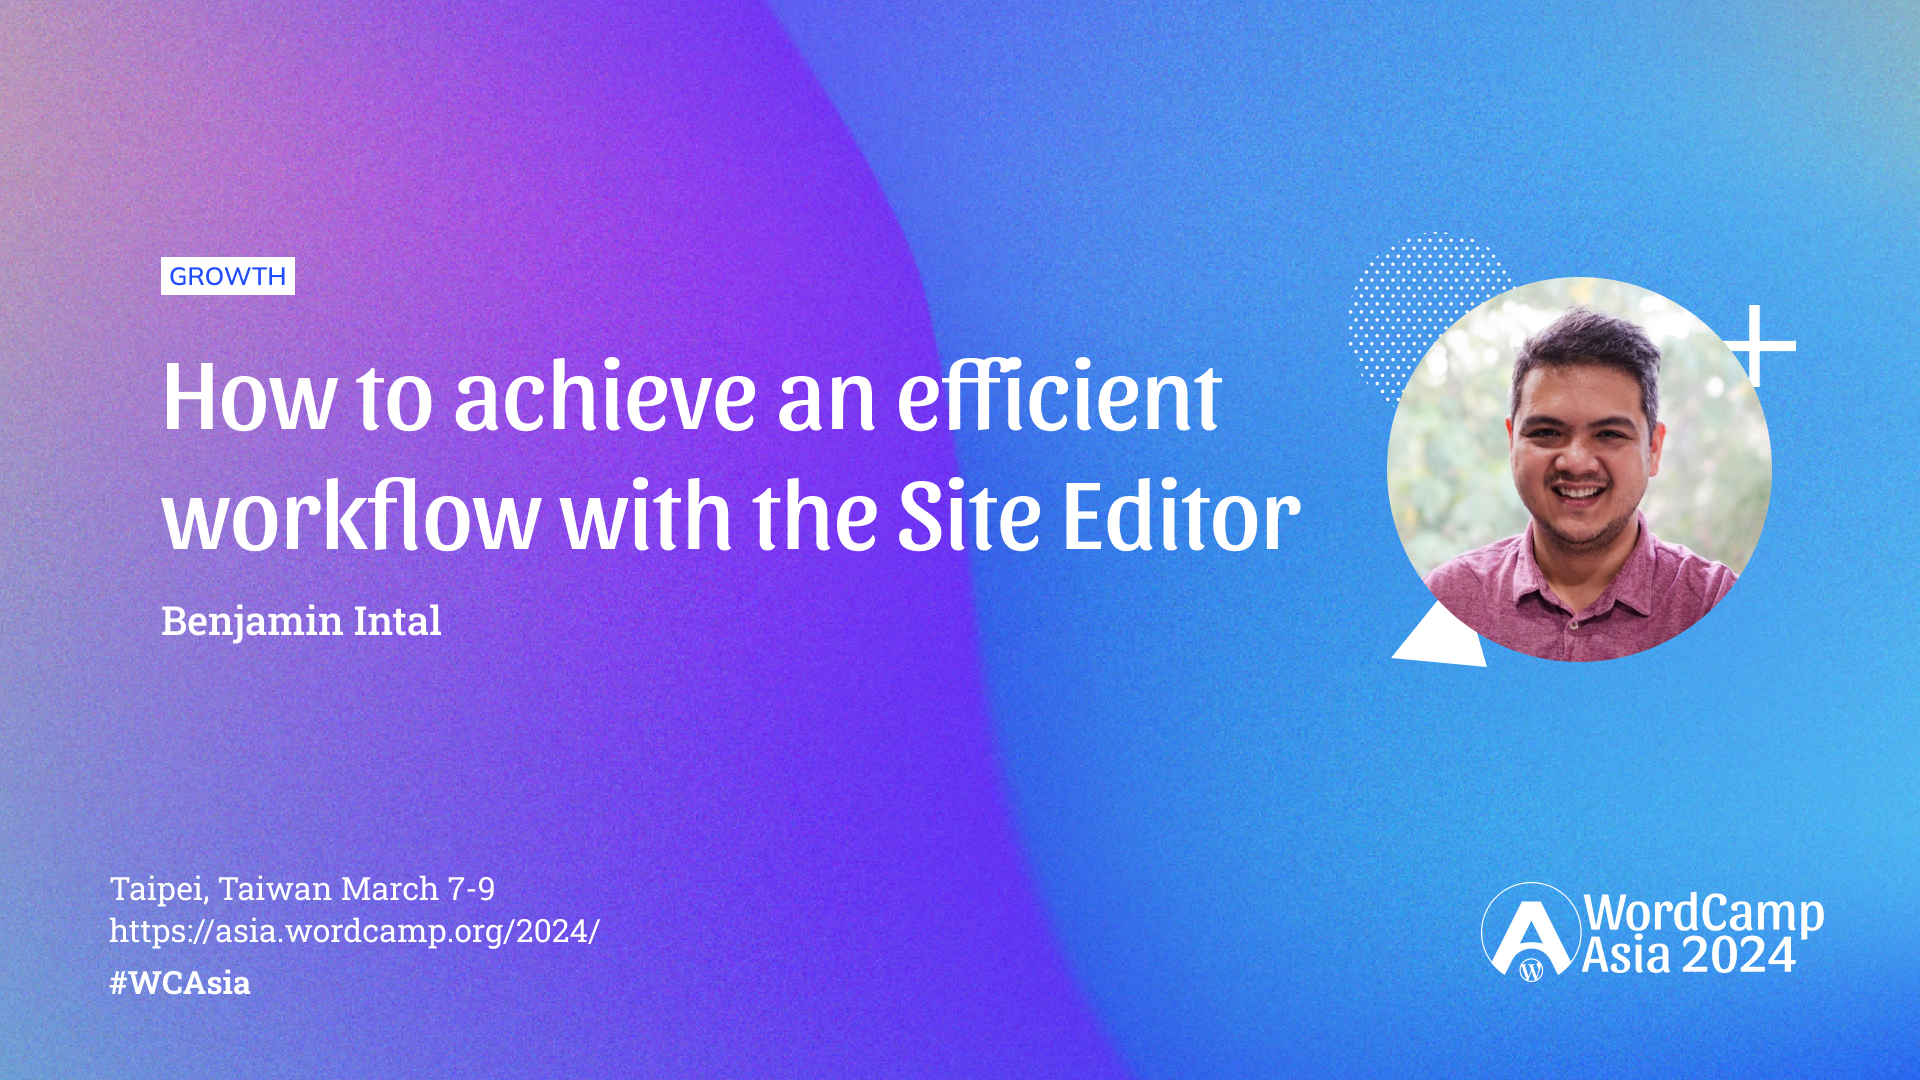 How to achieve an efficient workflow with the Site Editor